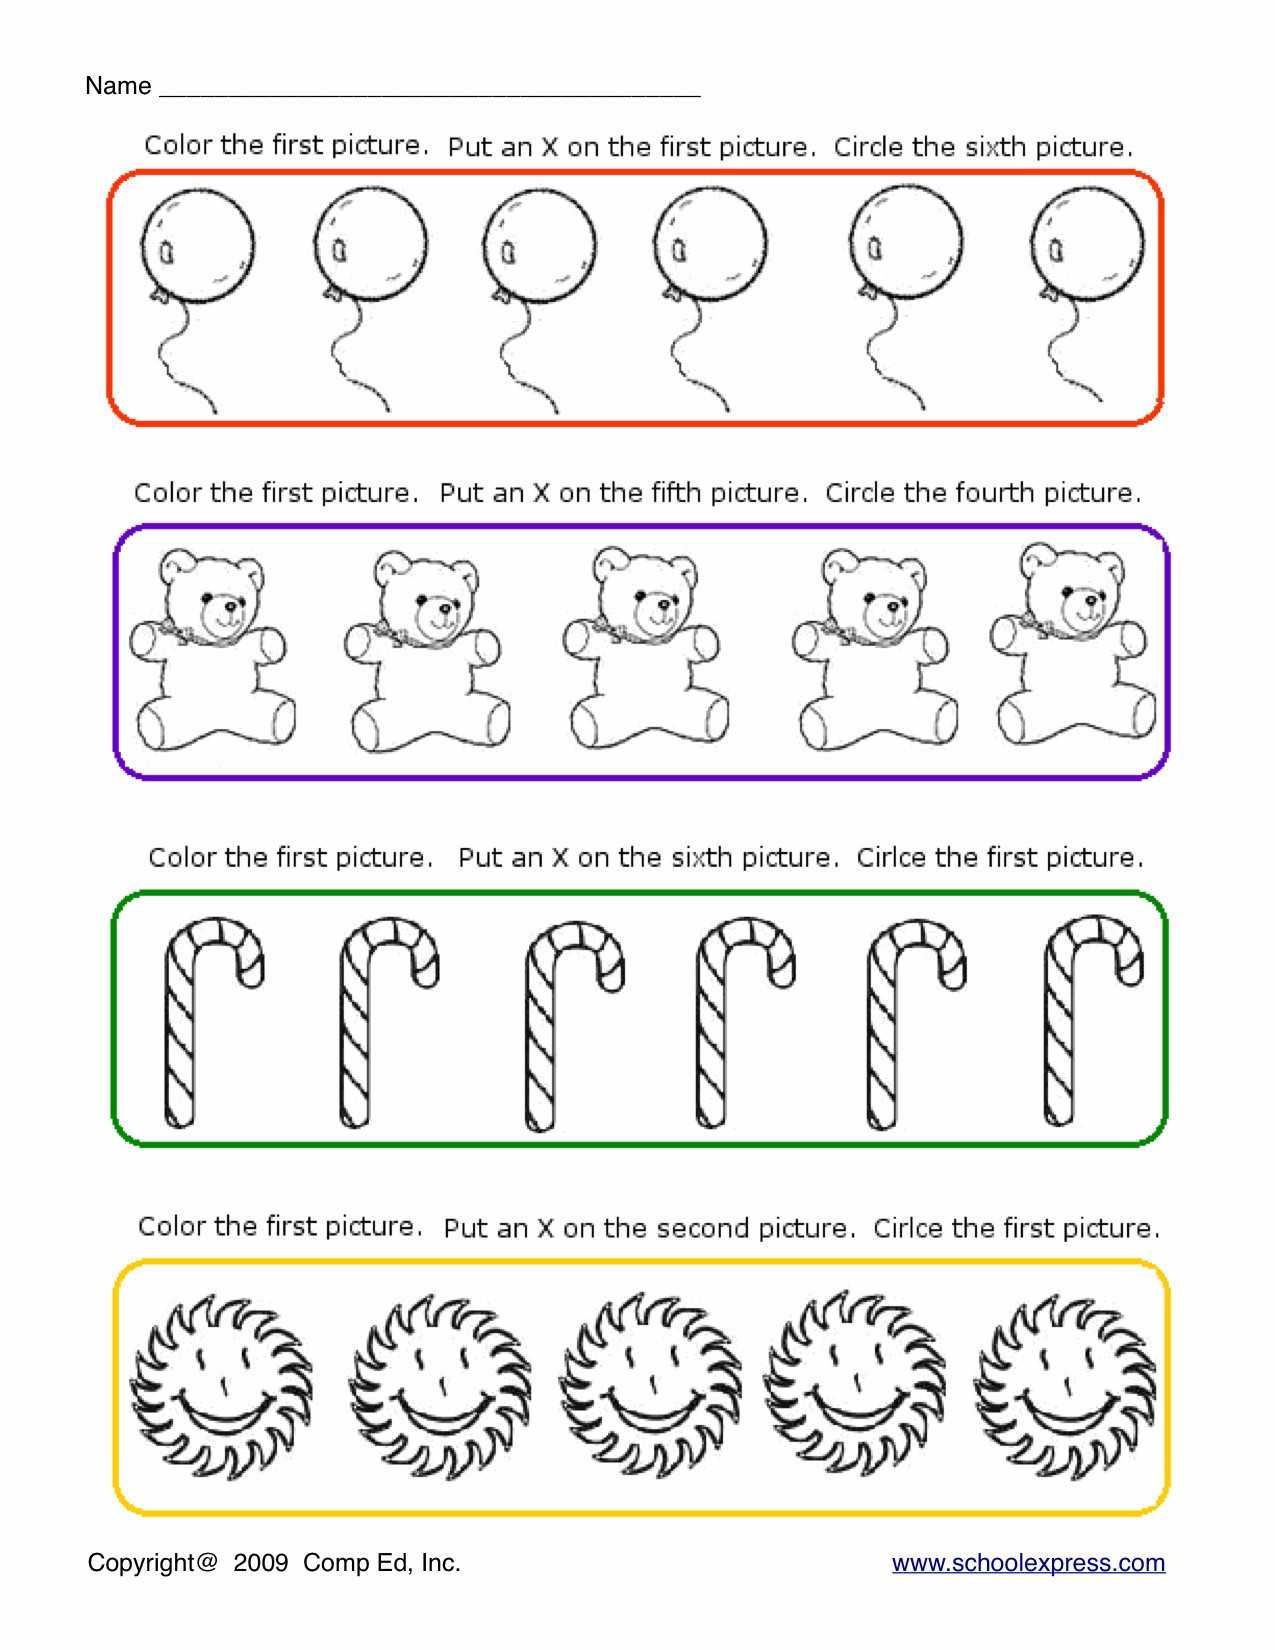 9th Grade Spanish Worksheets Along with Printable Coloring Pages for Emotions New Worksheet English